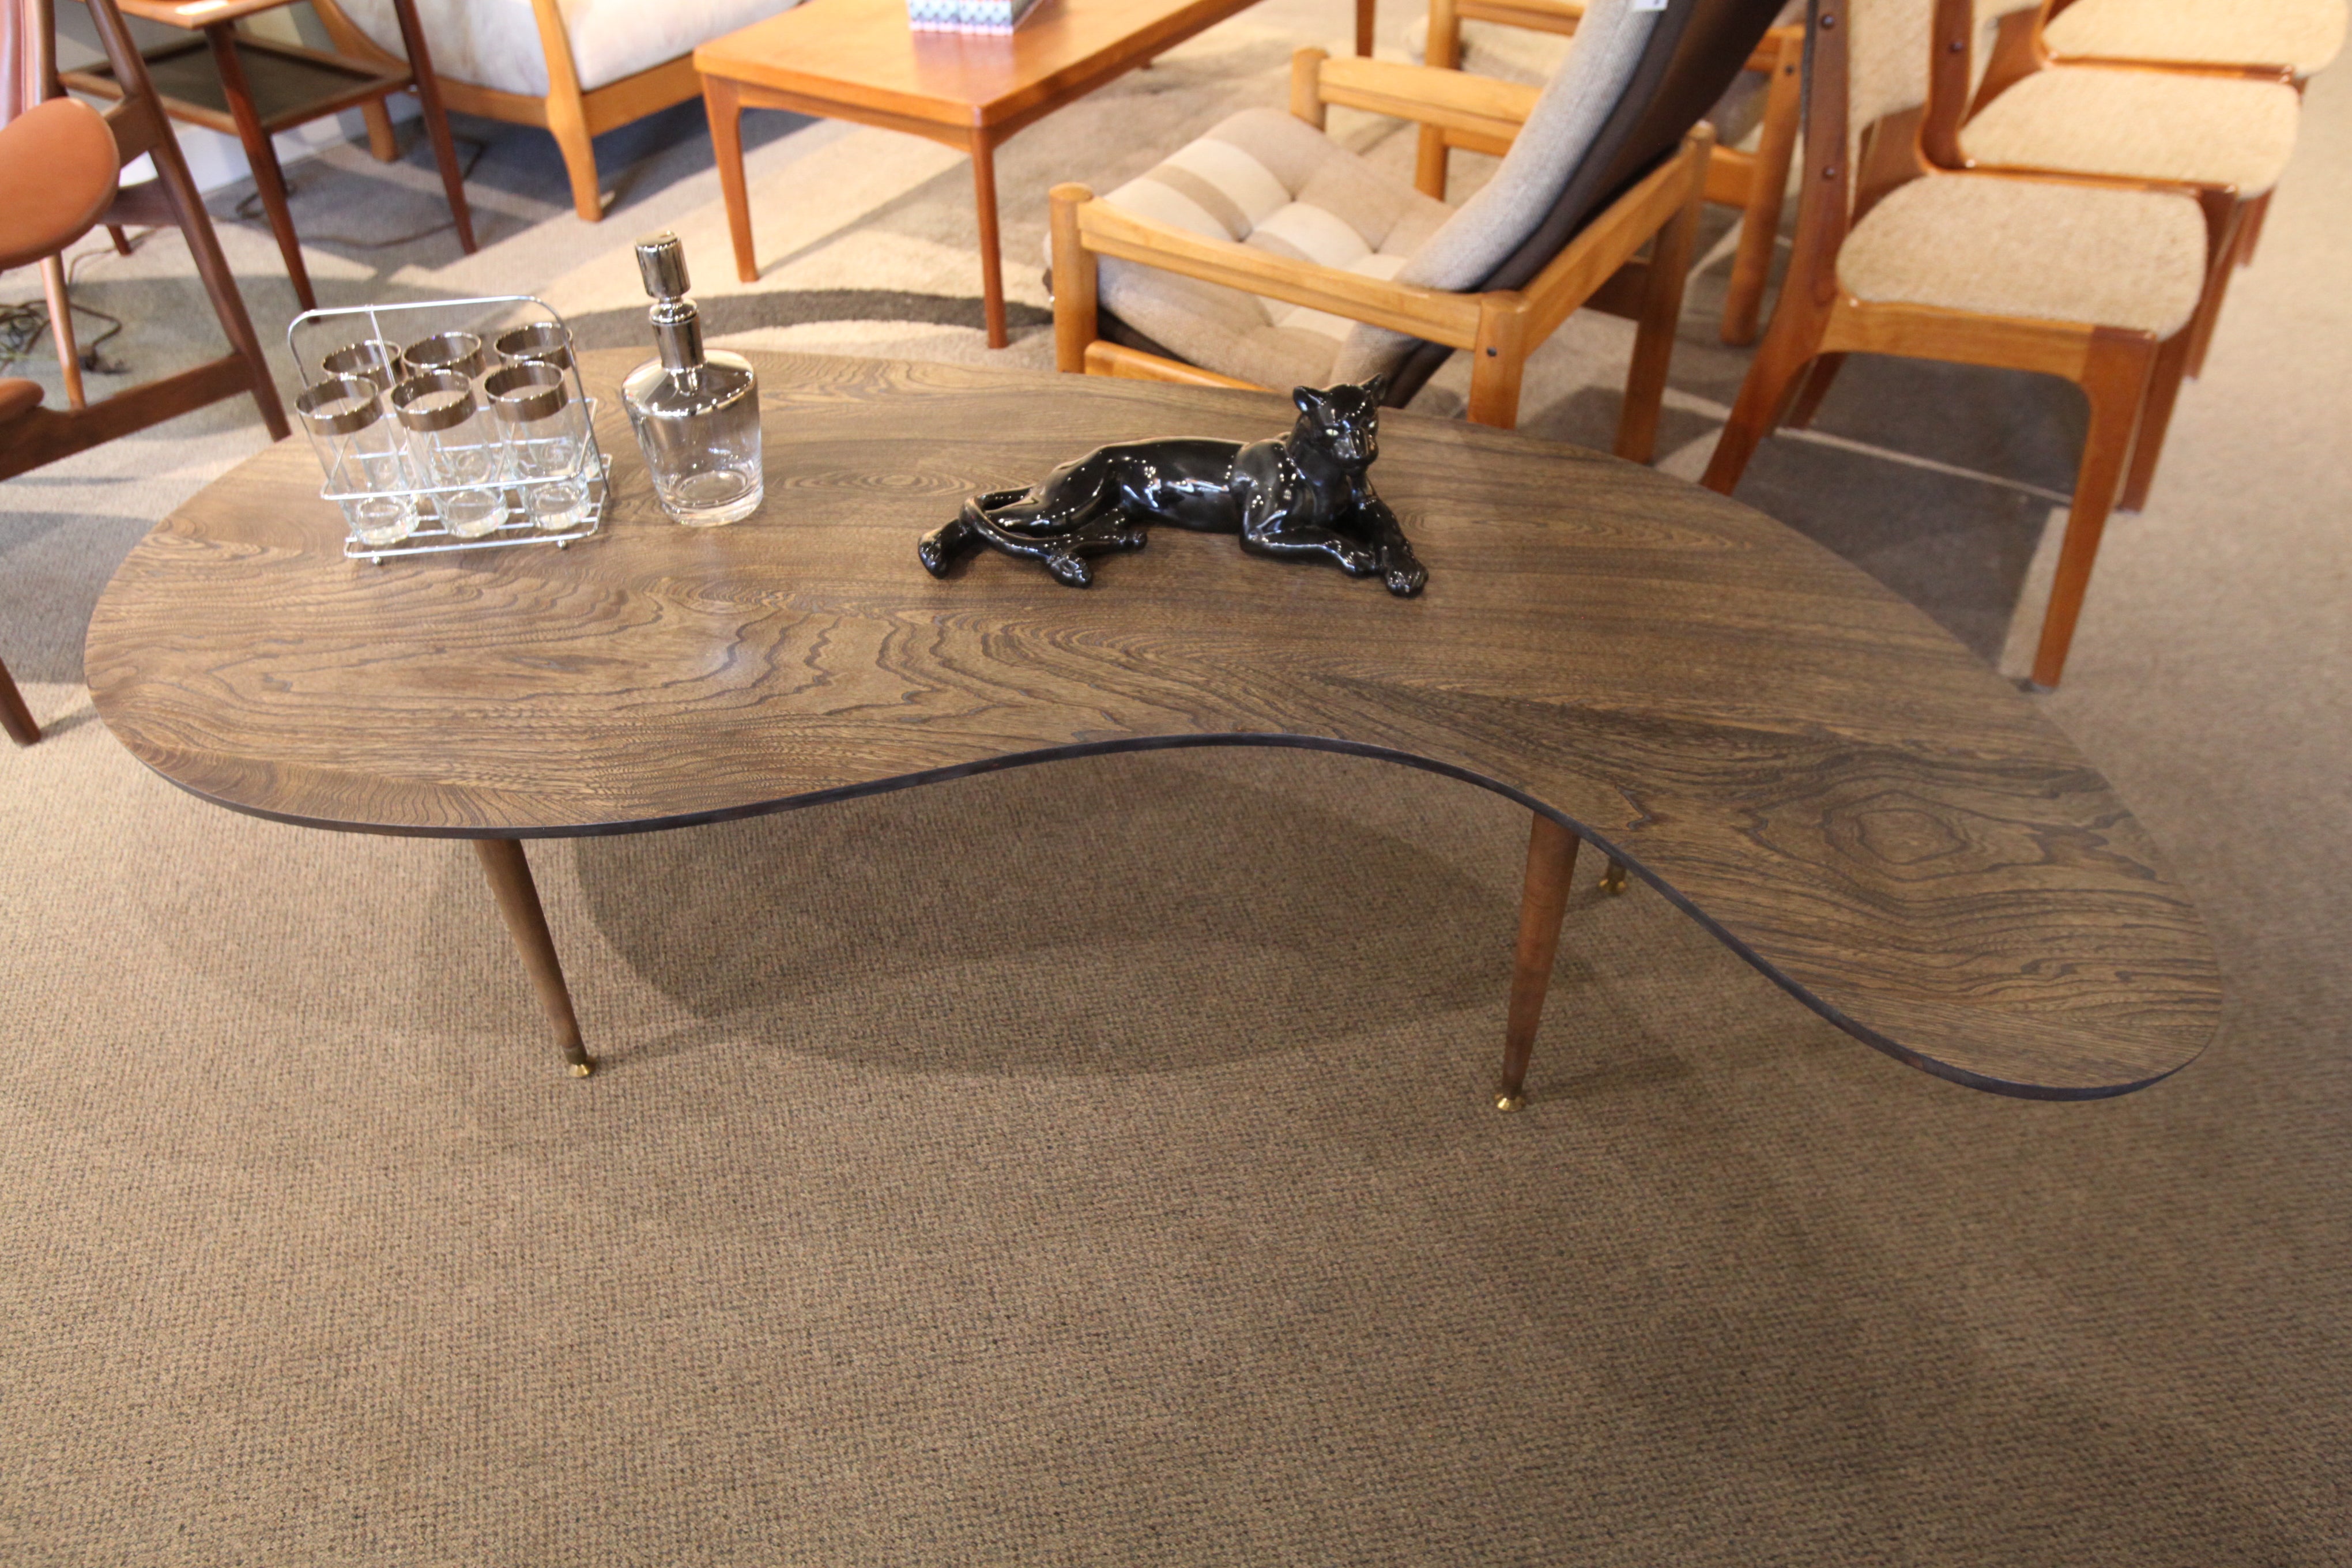 Very Cool Vintage Kidney Shaped Coffee Table (Approx 73" x 33" x 17"H)